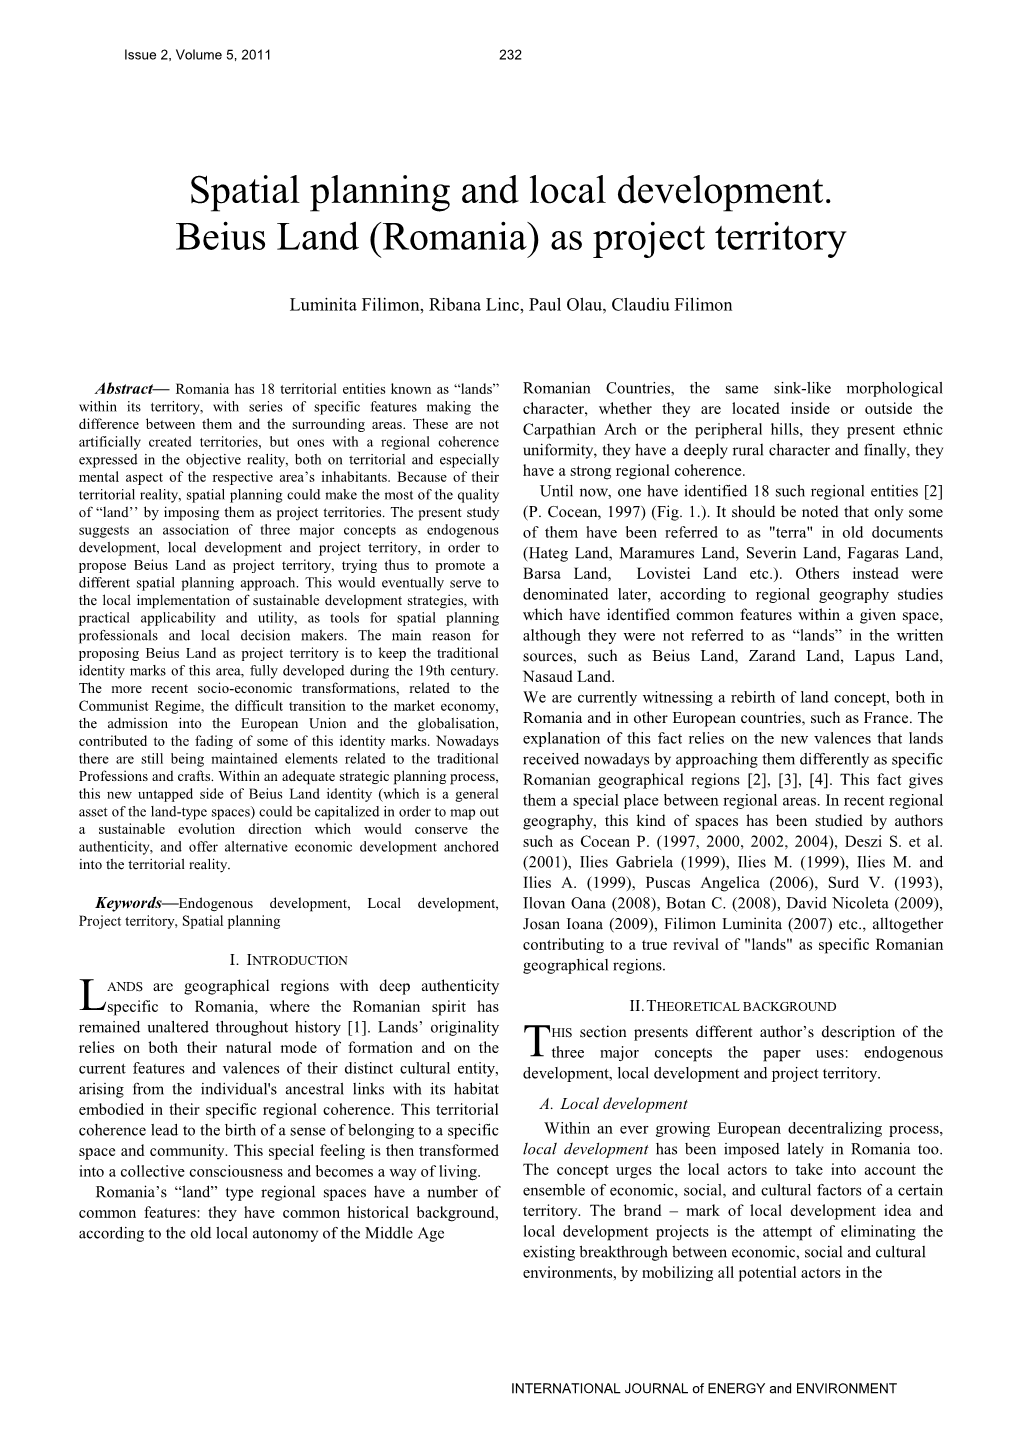 Spatial Planning and Local Development. Beius Land (Romania) As Project Territory